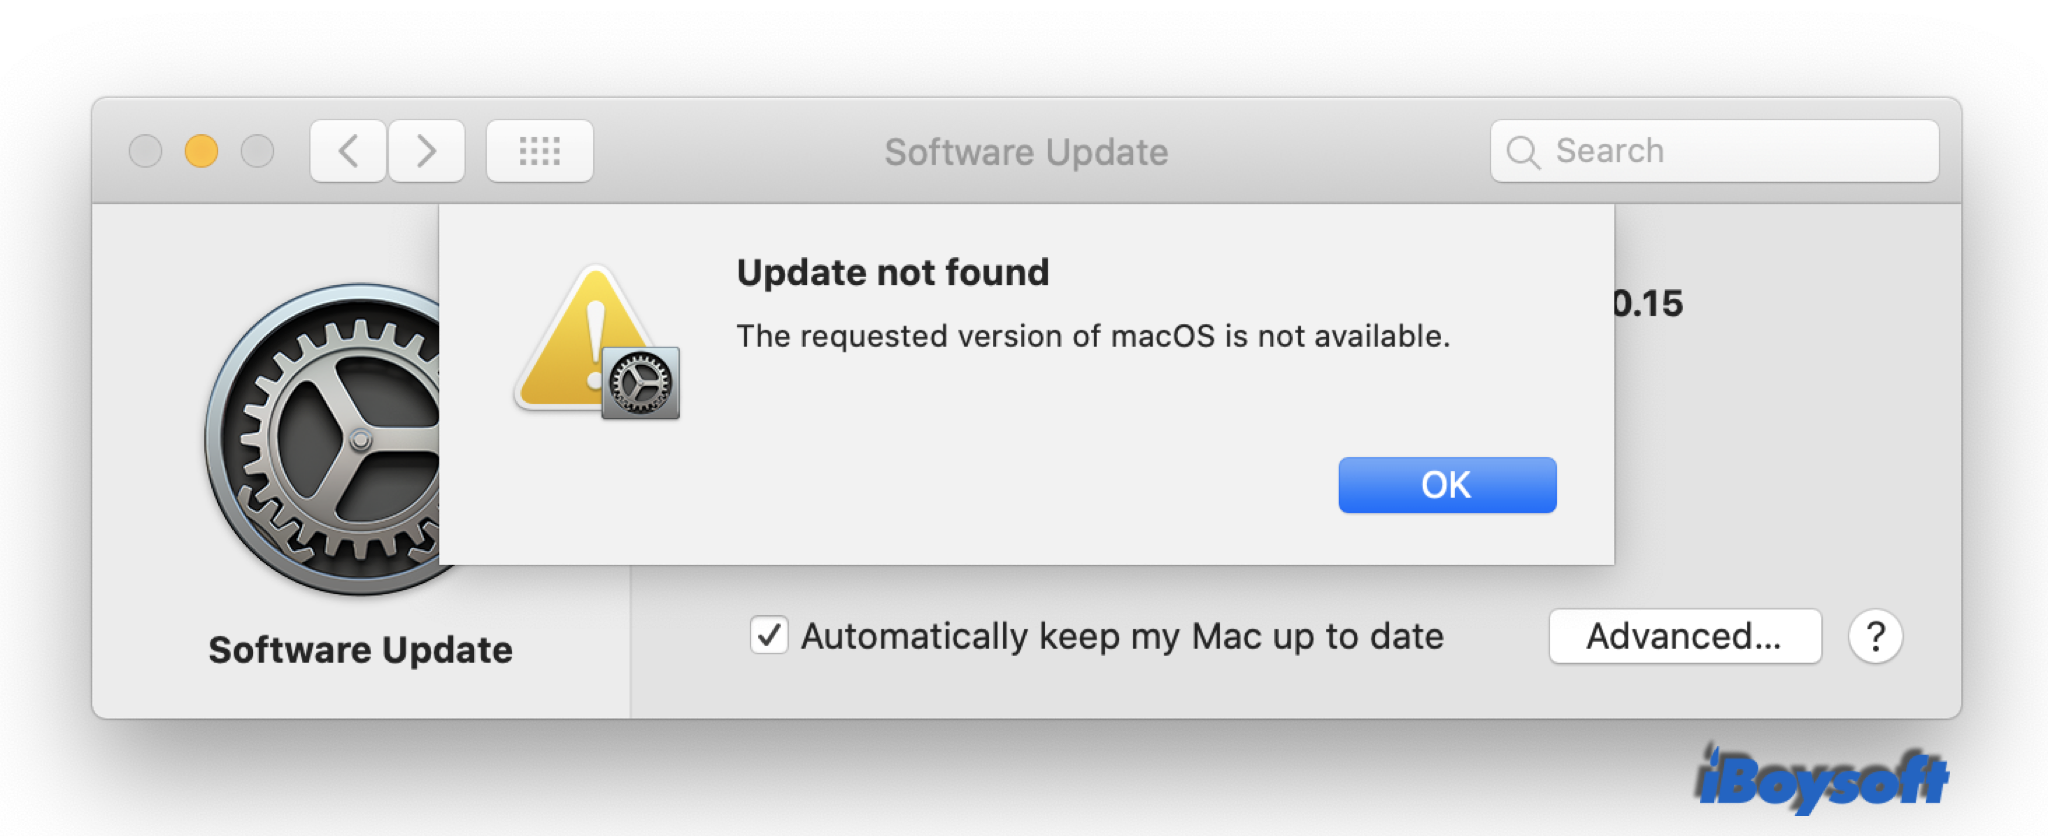 The requested version of macOS is not available